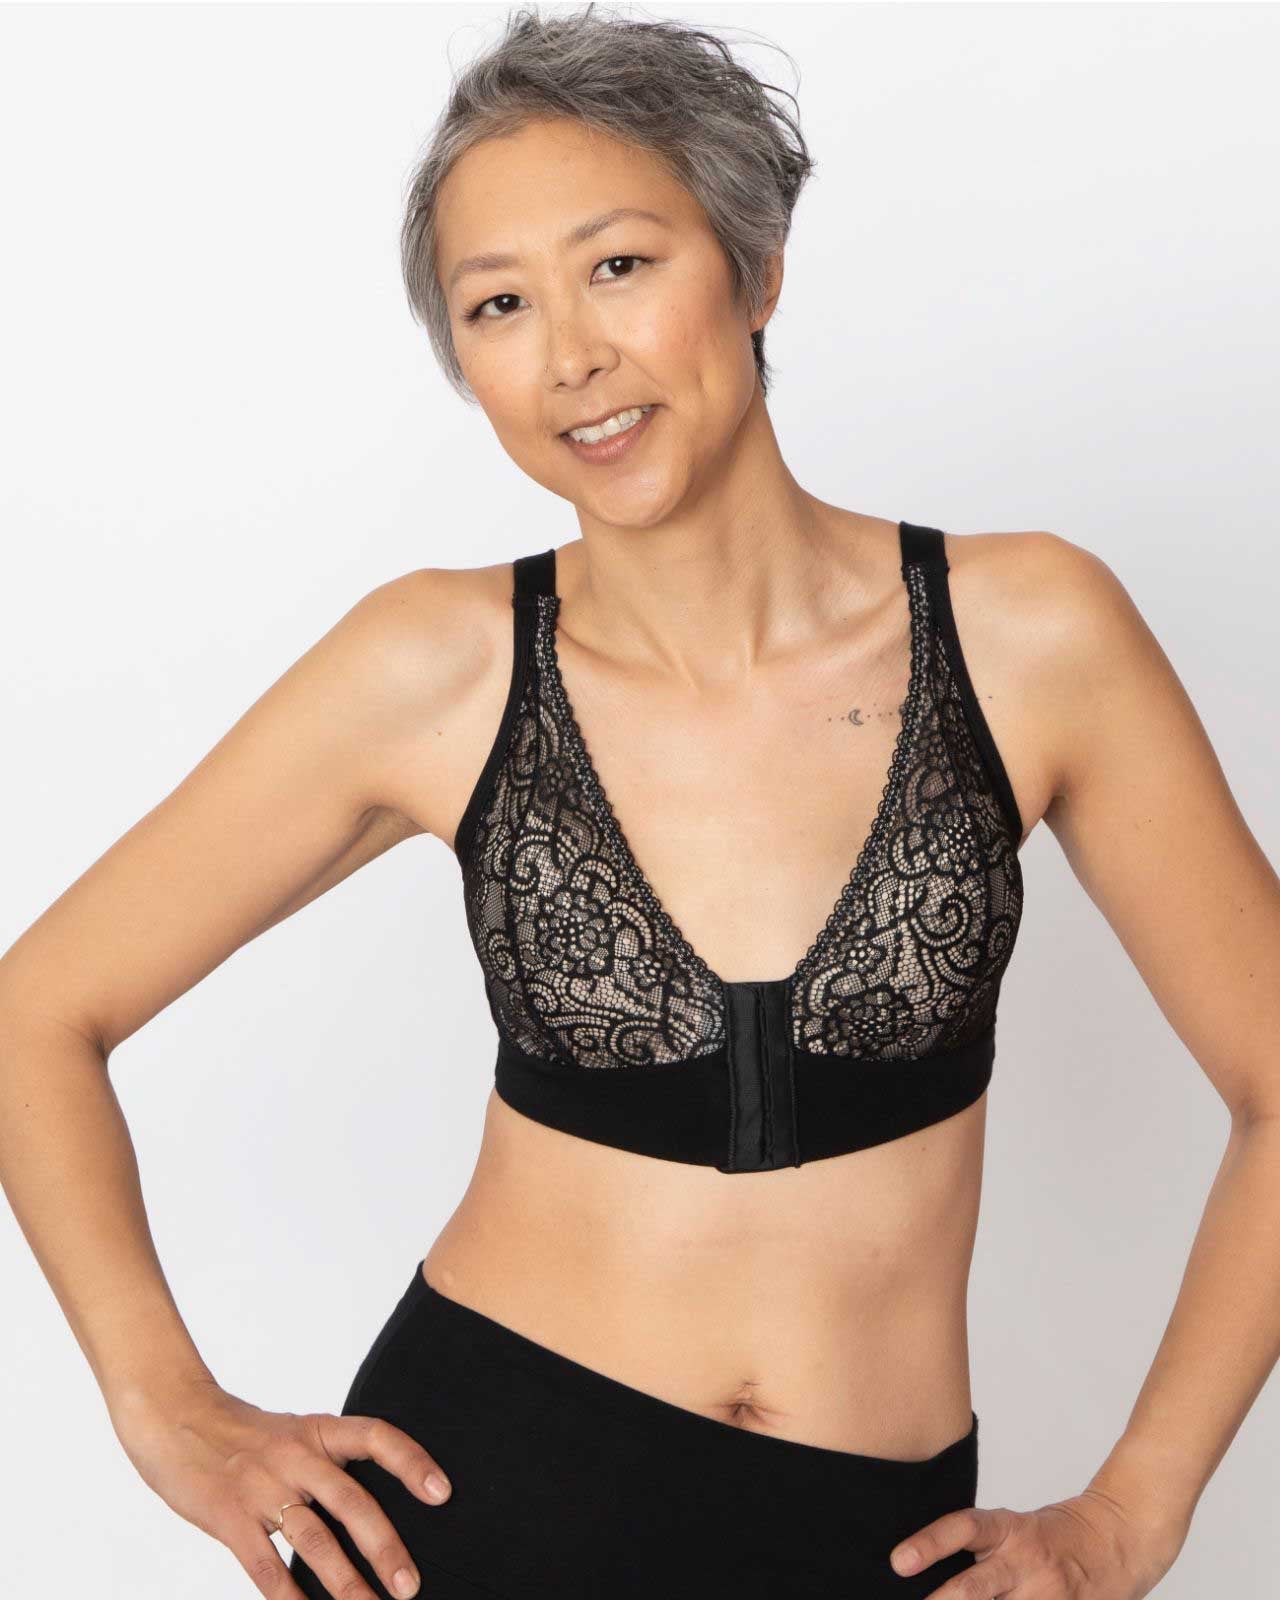 Introducing AnaOno Intimates: Pretty and Empowering Post-Mastectomy Bras